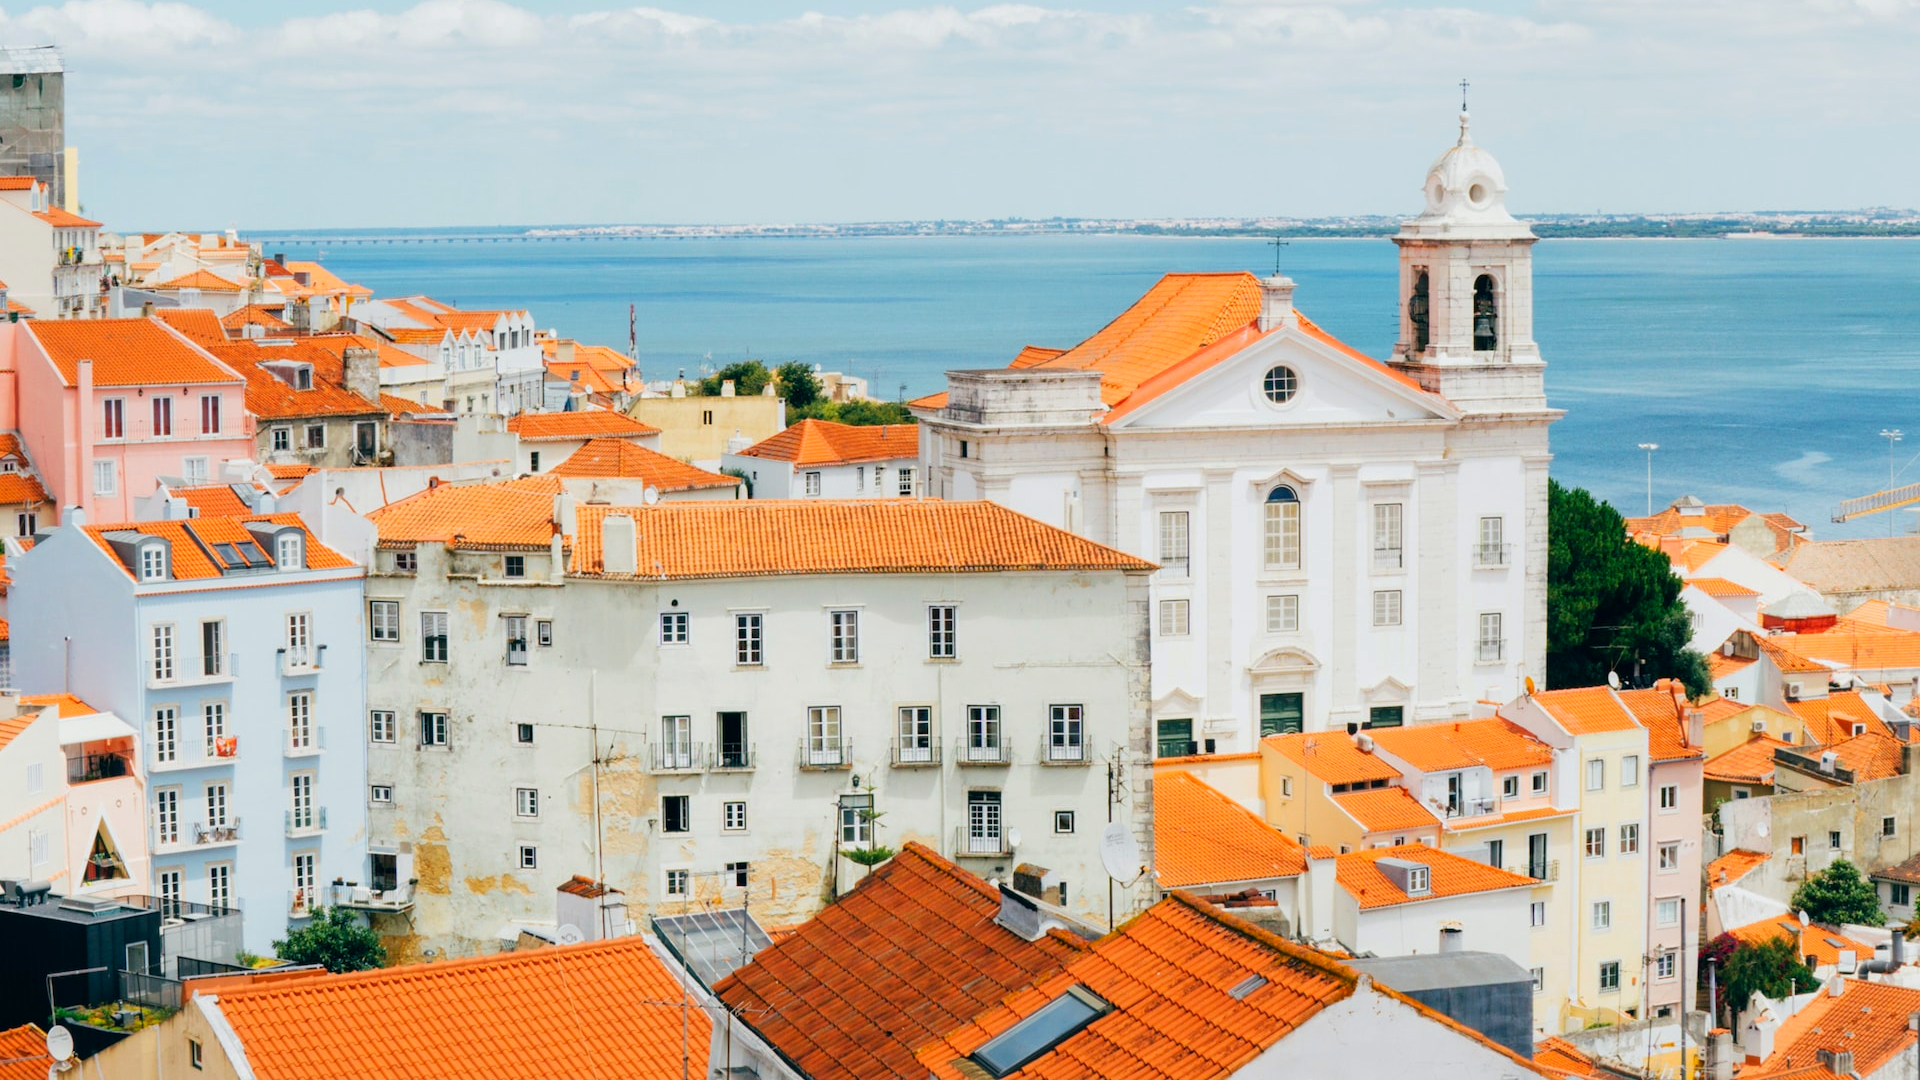 Considering attending LibertyCon Europe in April 2023? If so, you won't be disappointed with the host city. Lisbon is a destination that has it all